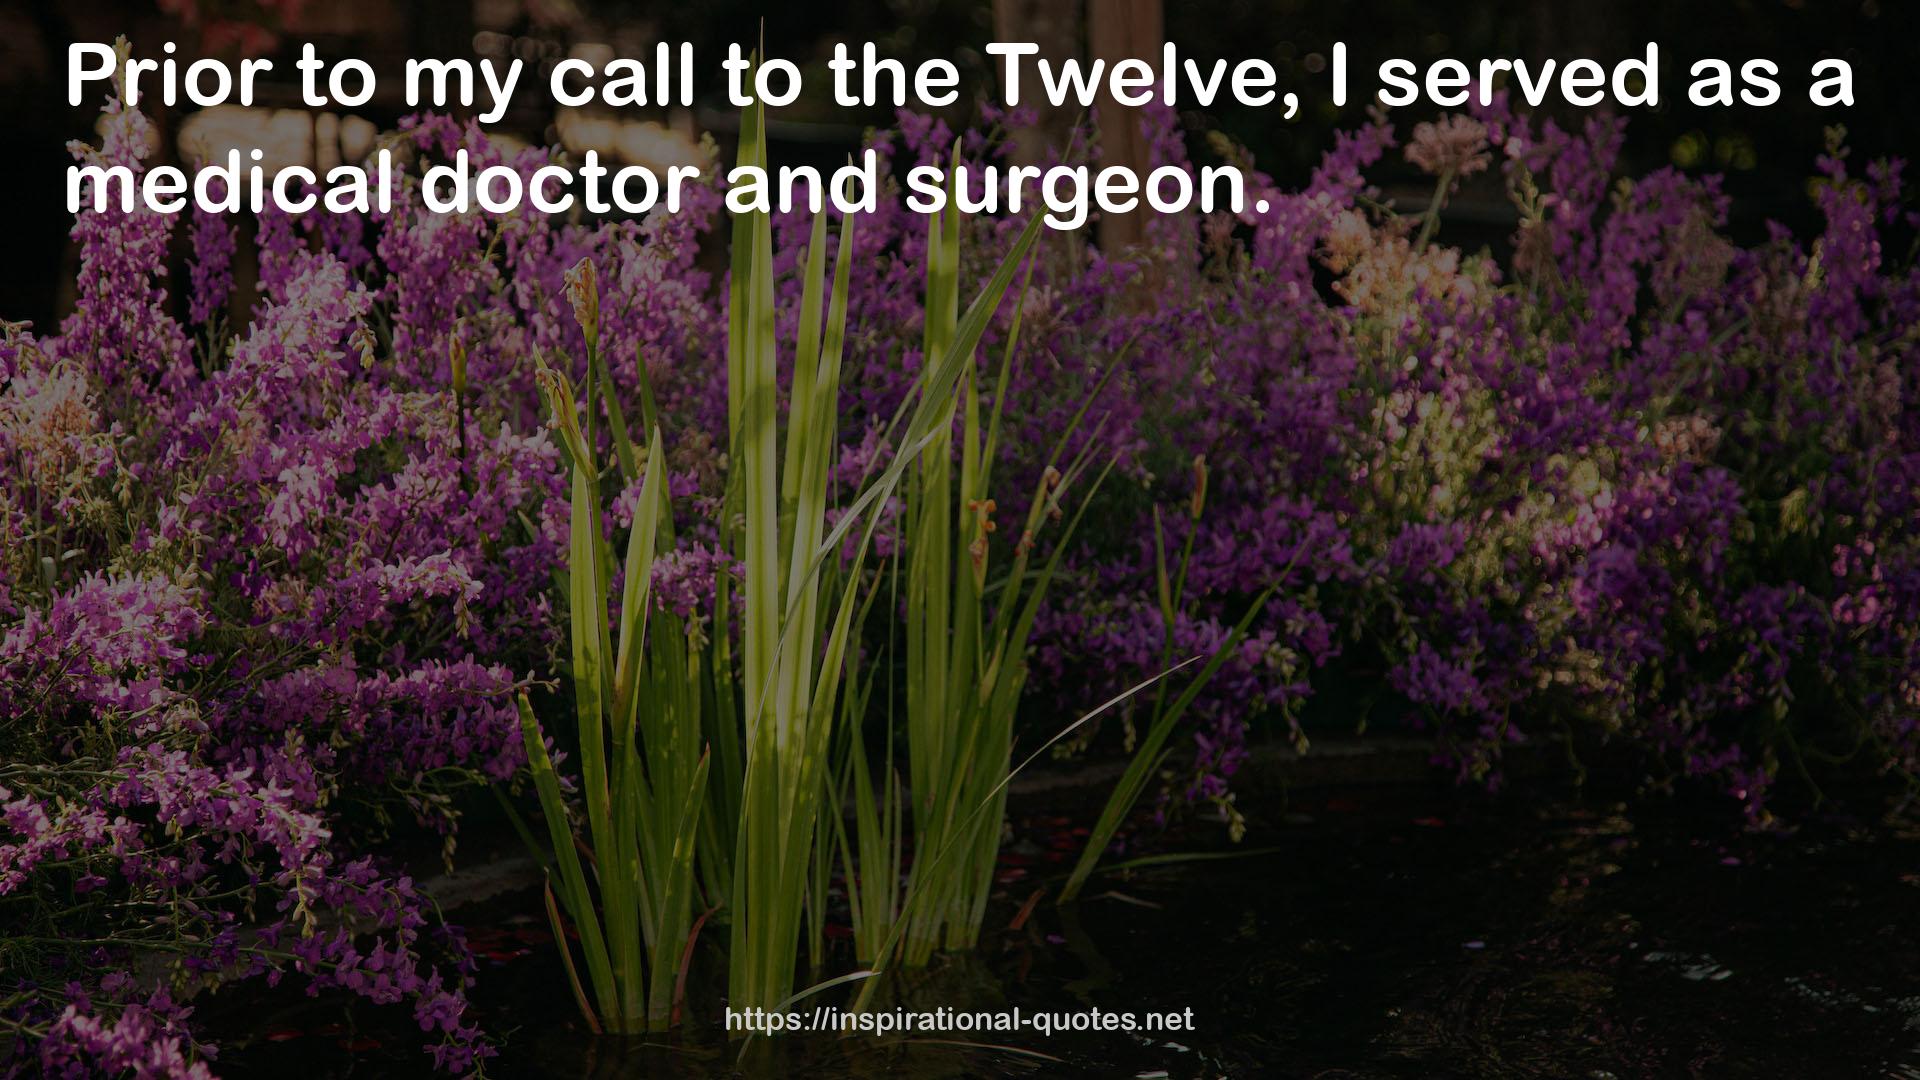 a medical doctor  QUOTES